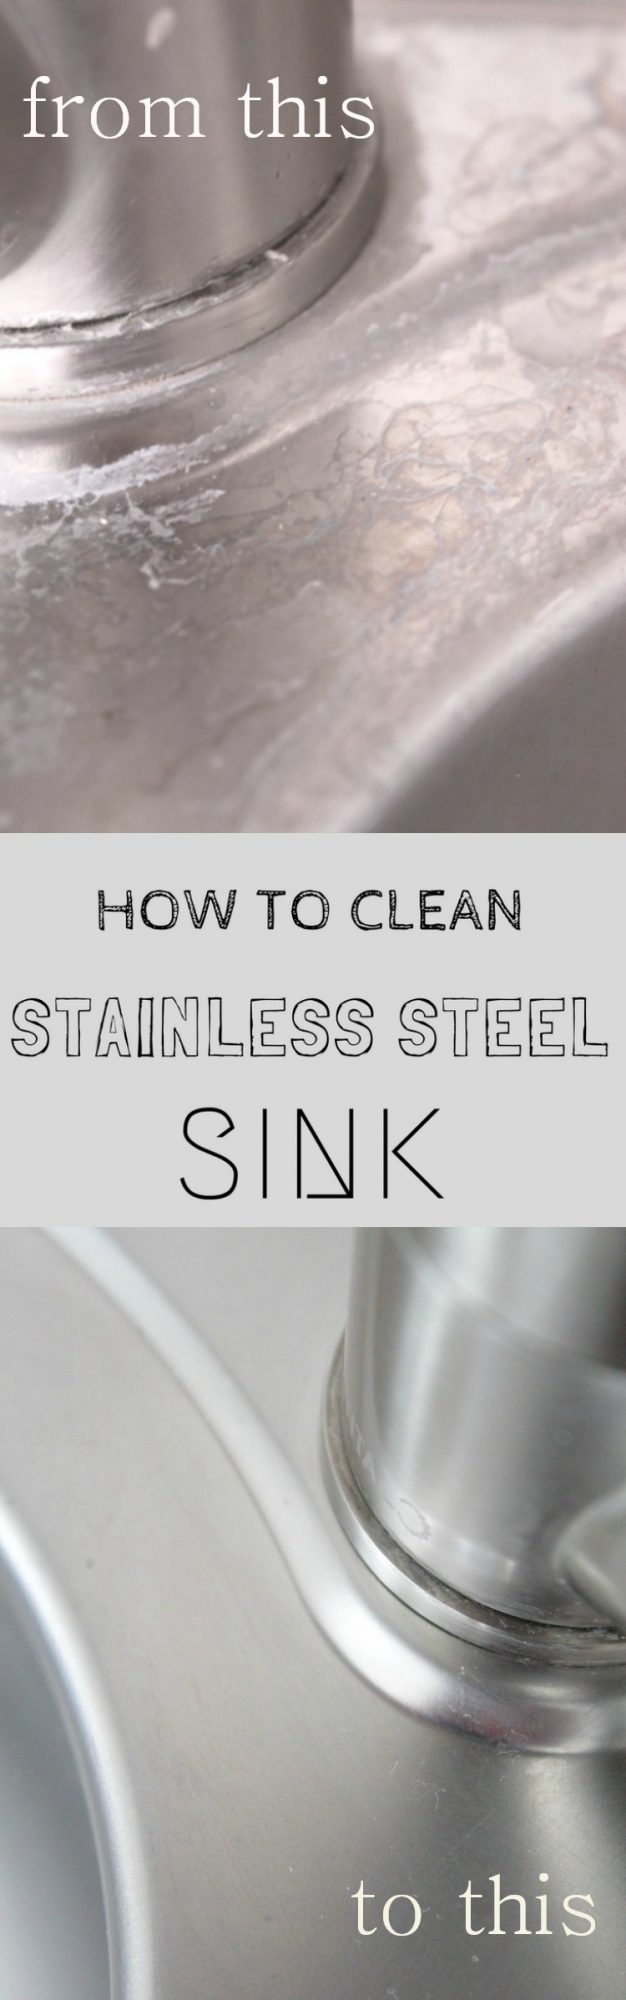 Best way to clean stainless steel sink